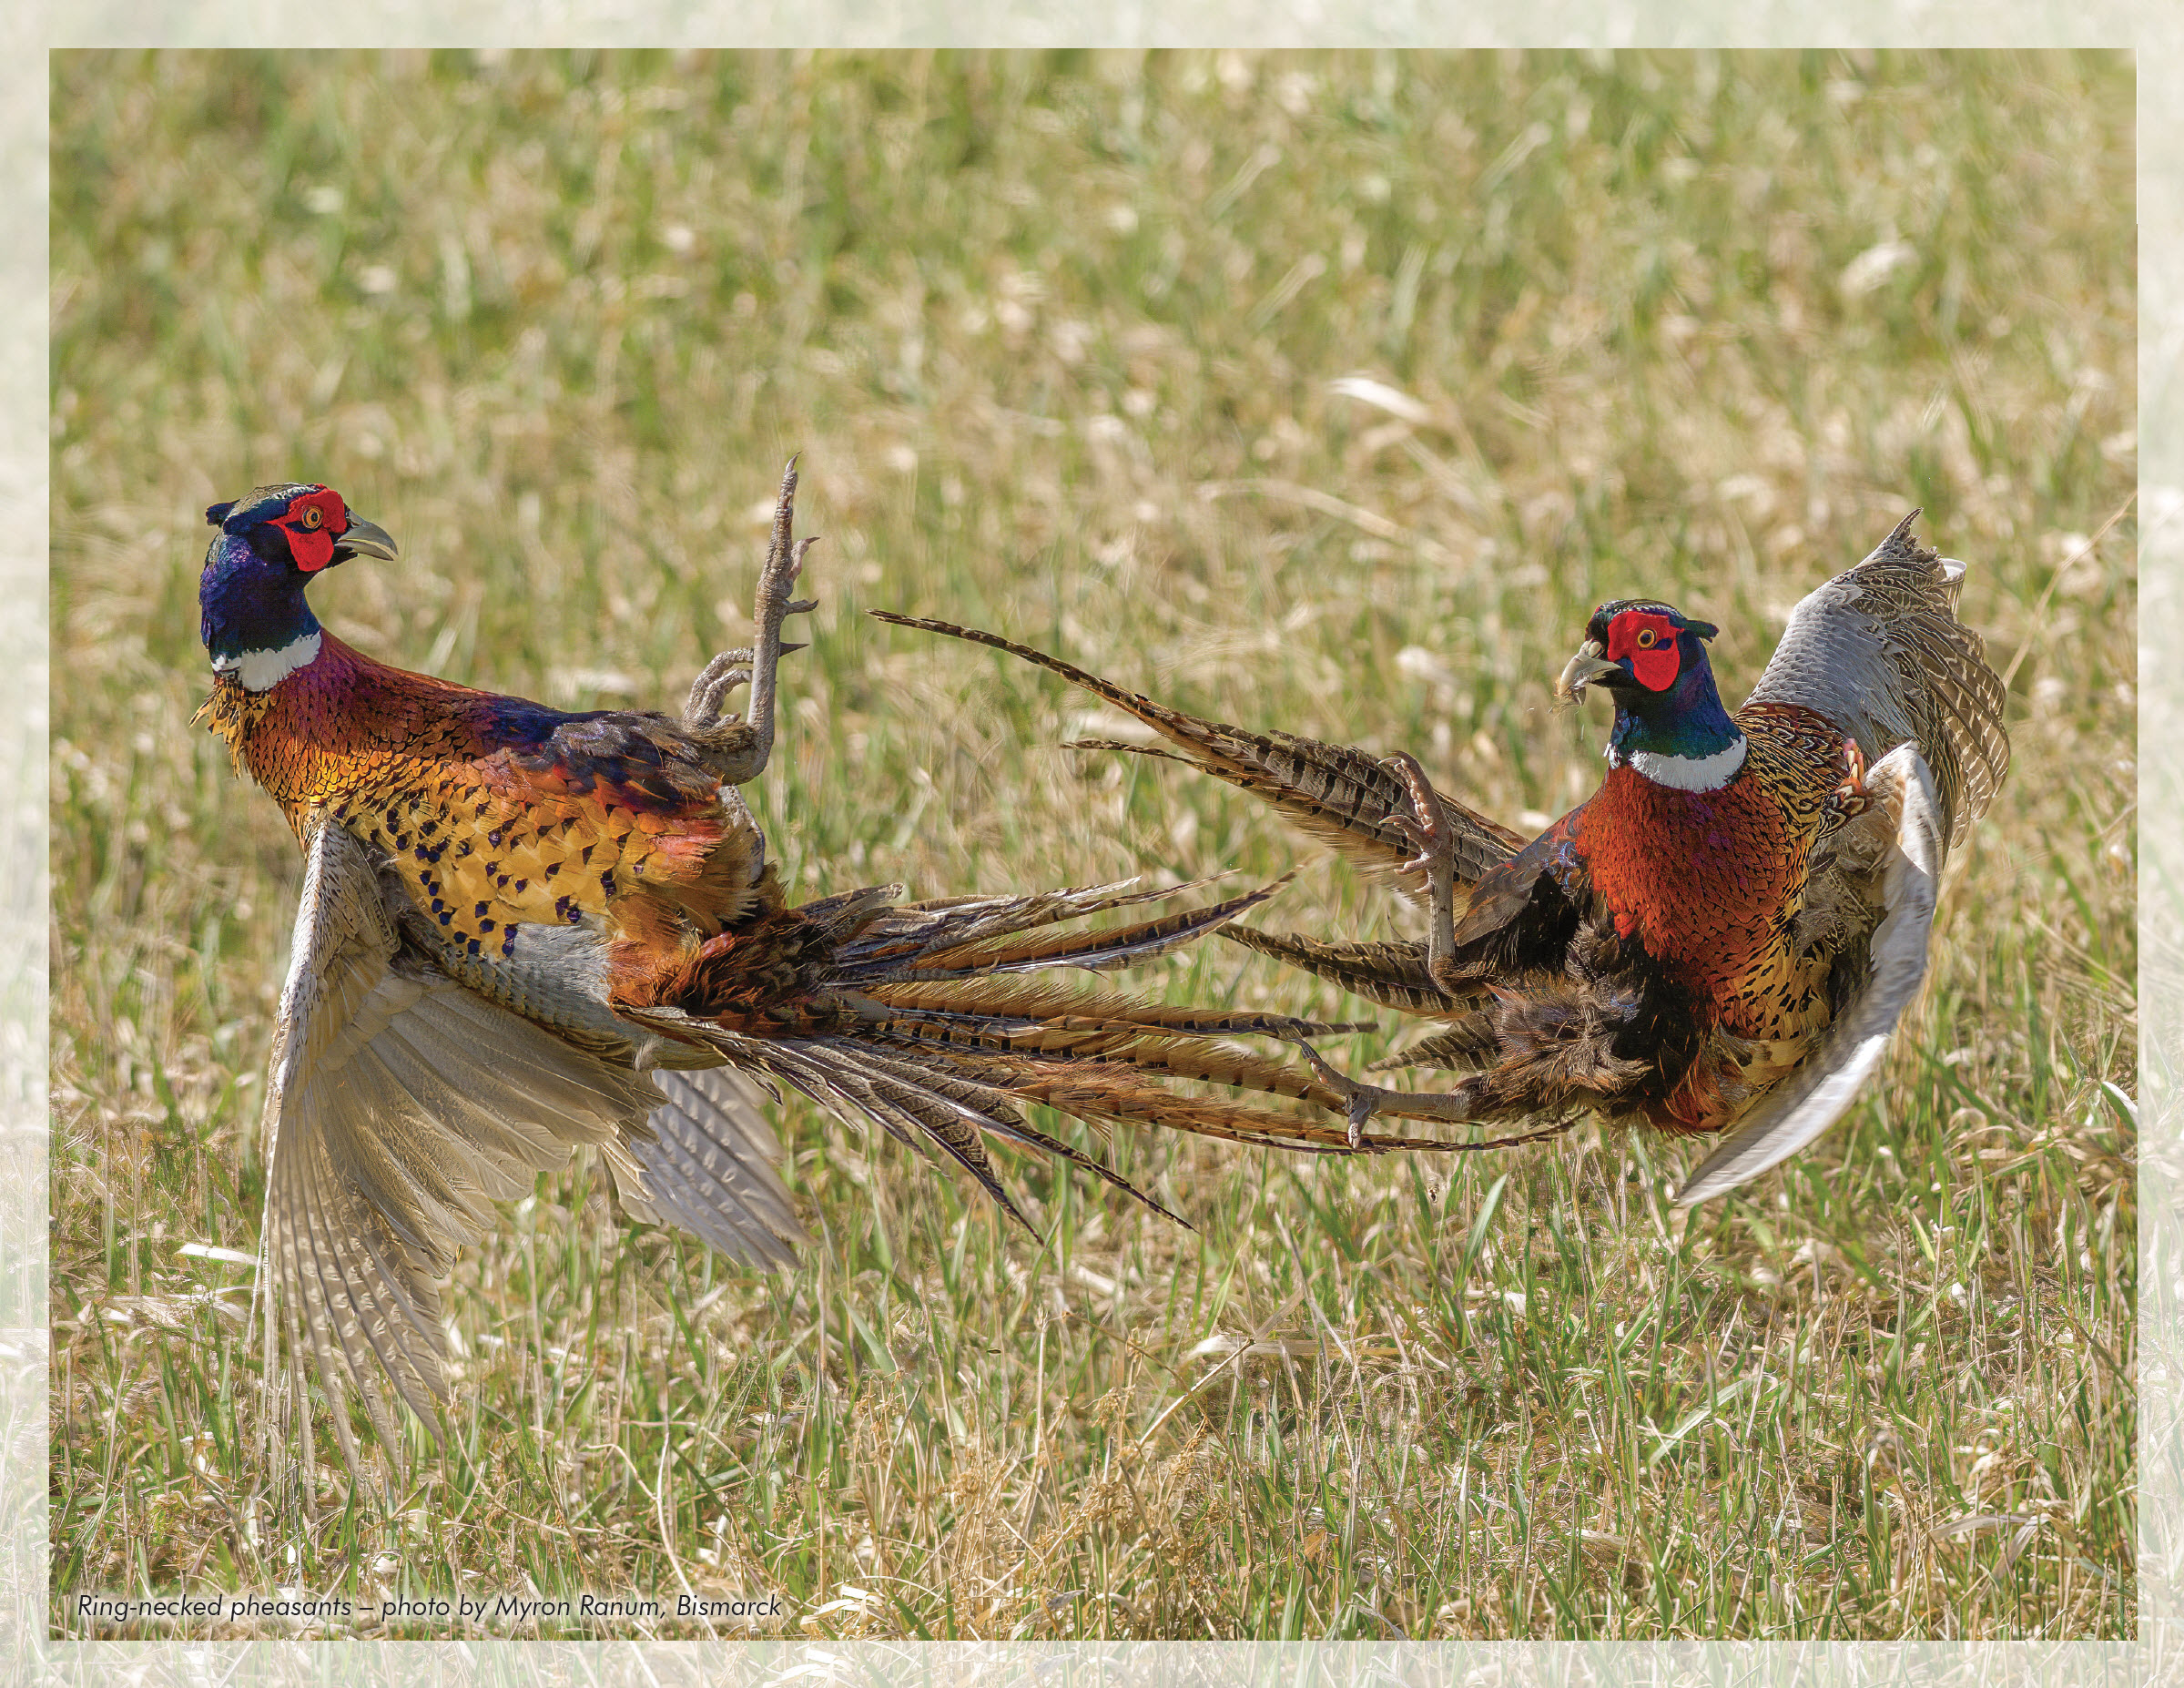 Two ring-necked pheasant roosters fighting